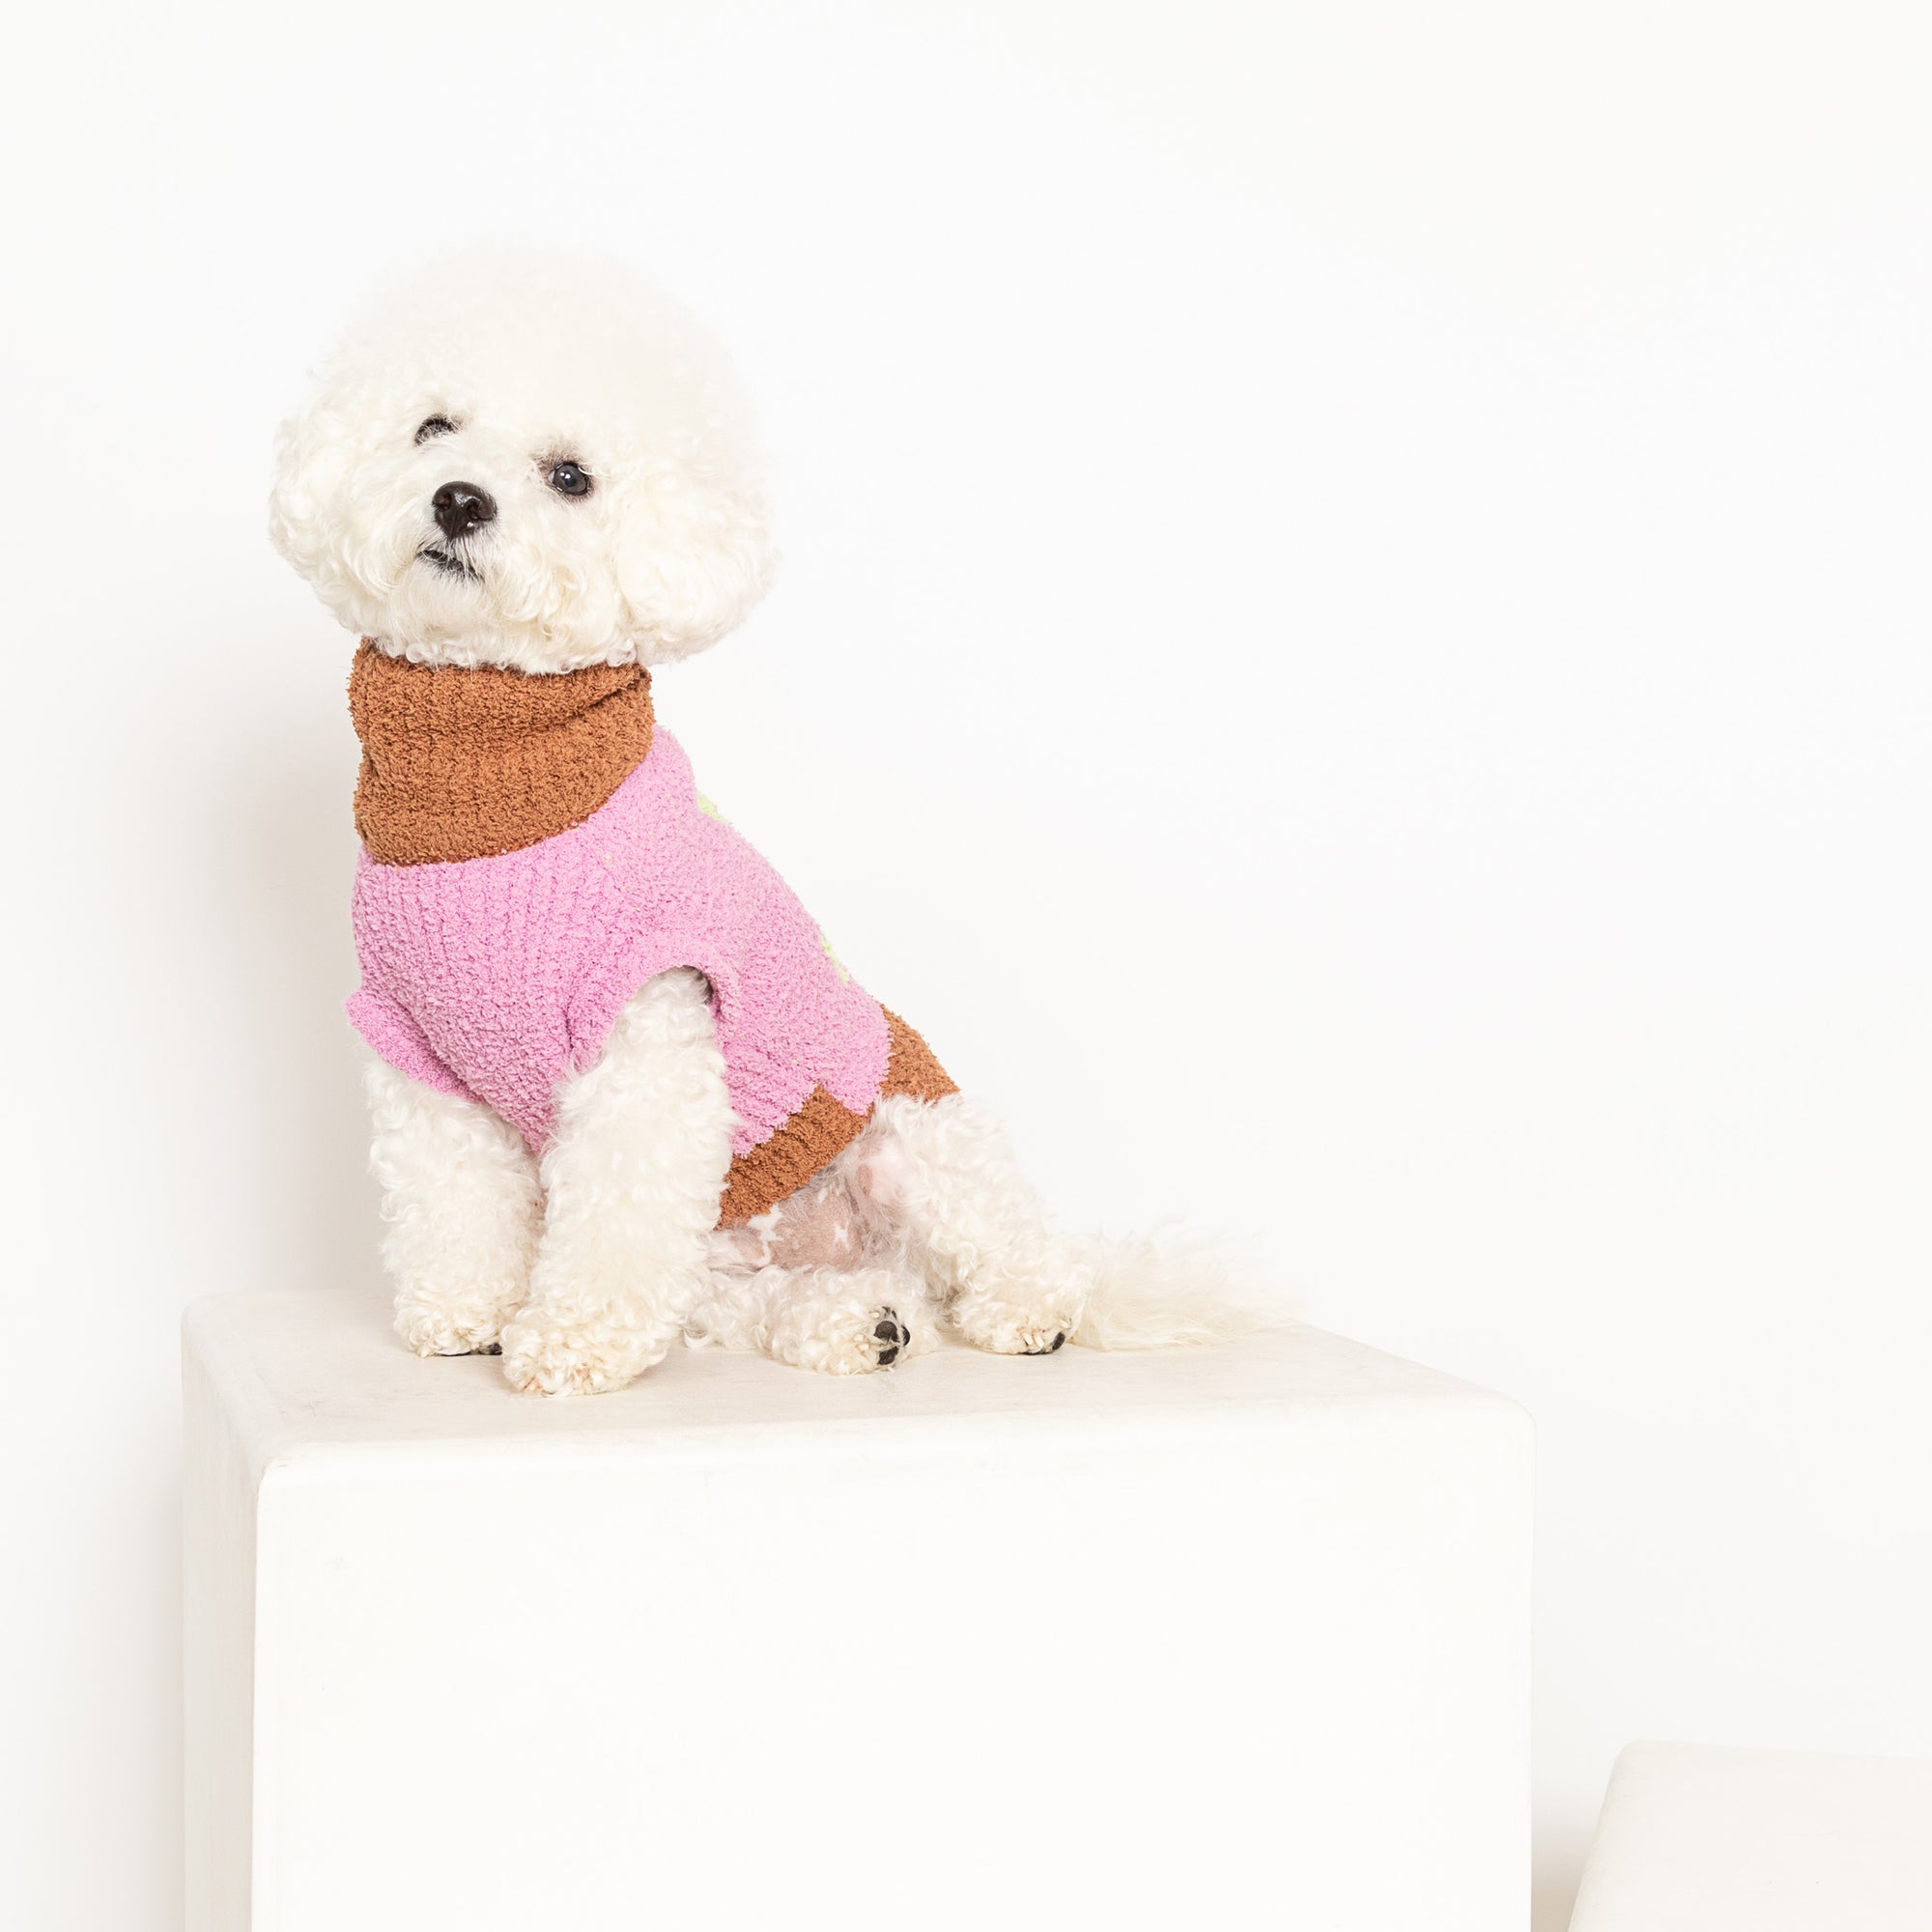  White Bichon Frise in a pink "The Furryfolks" Hey sweater, looking up, on a white pedestal.